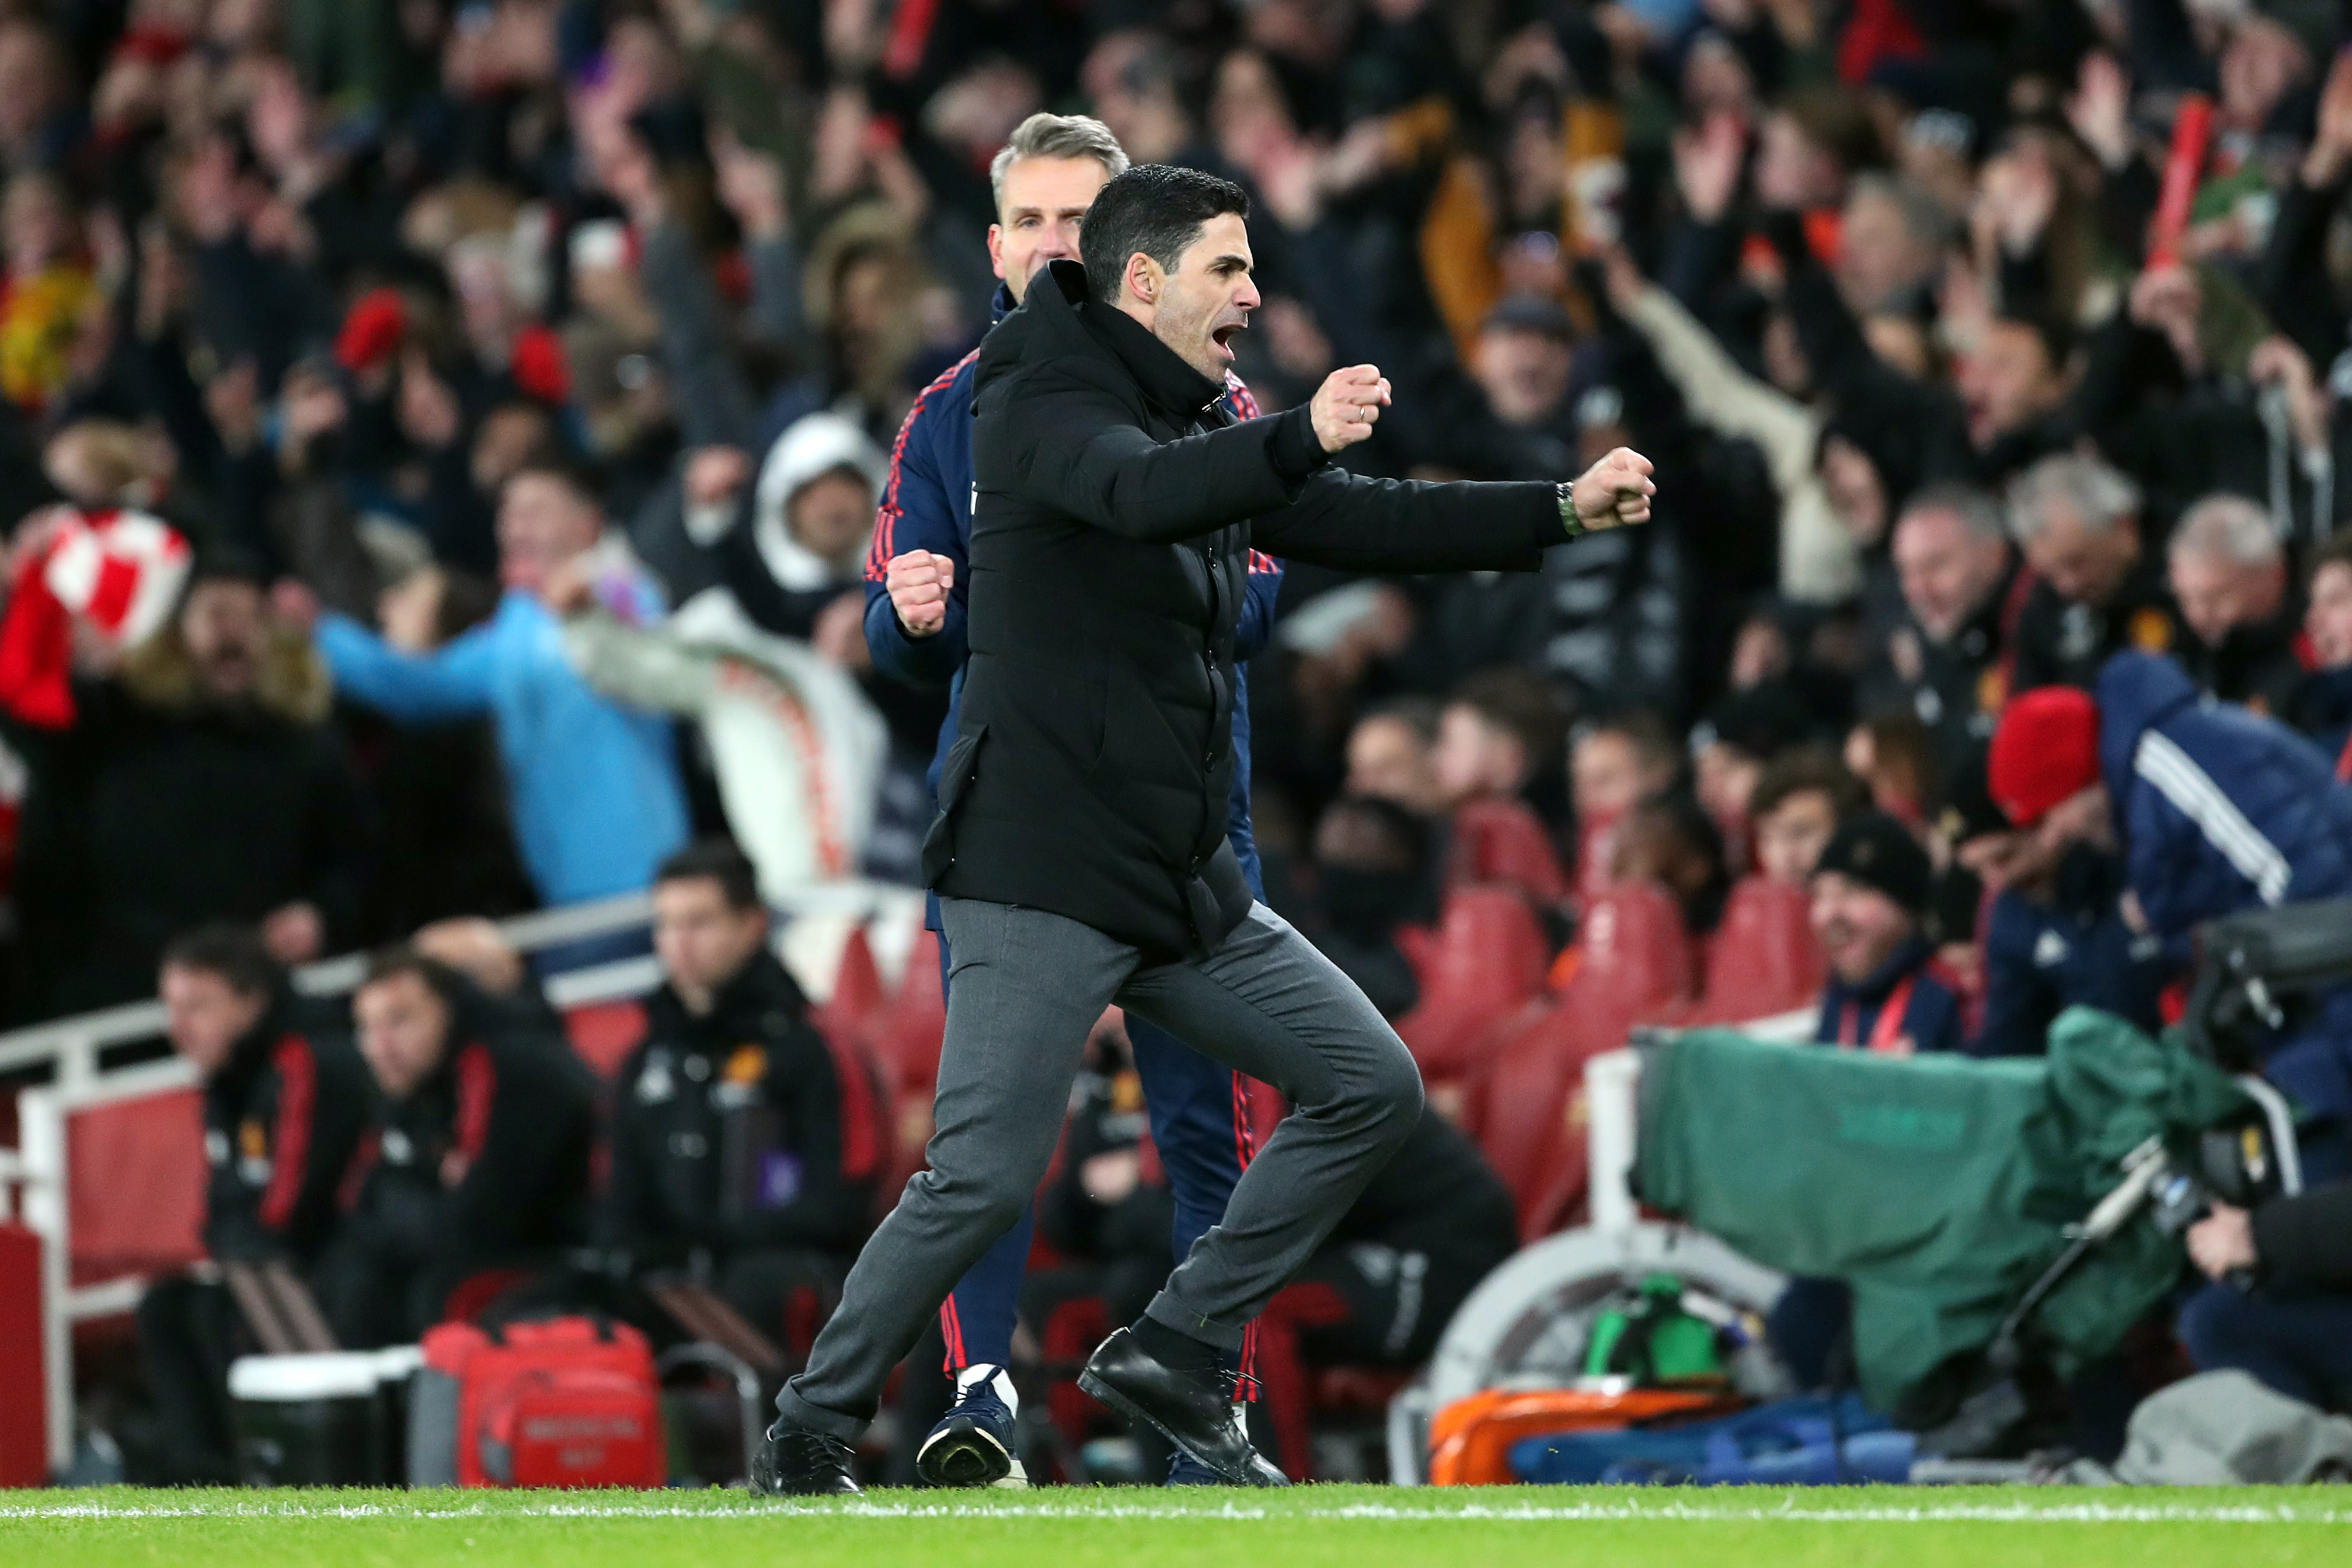 Arsenal boss Mikel Arteta opens up on Gunners 'emotional' 3-2 victory over Manchester United 